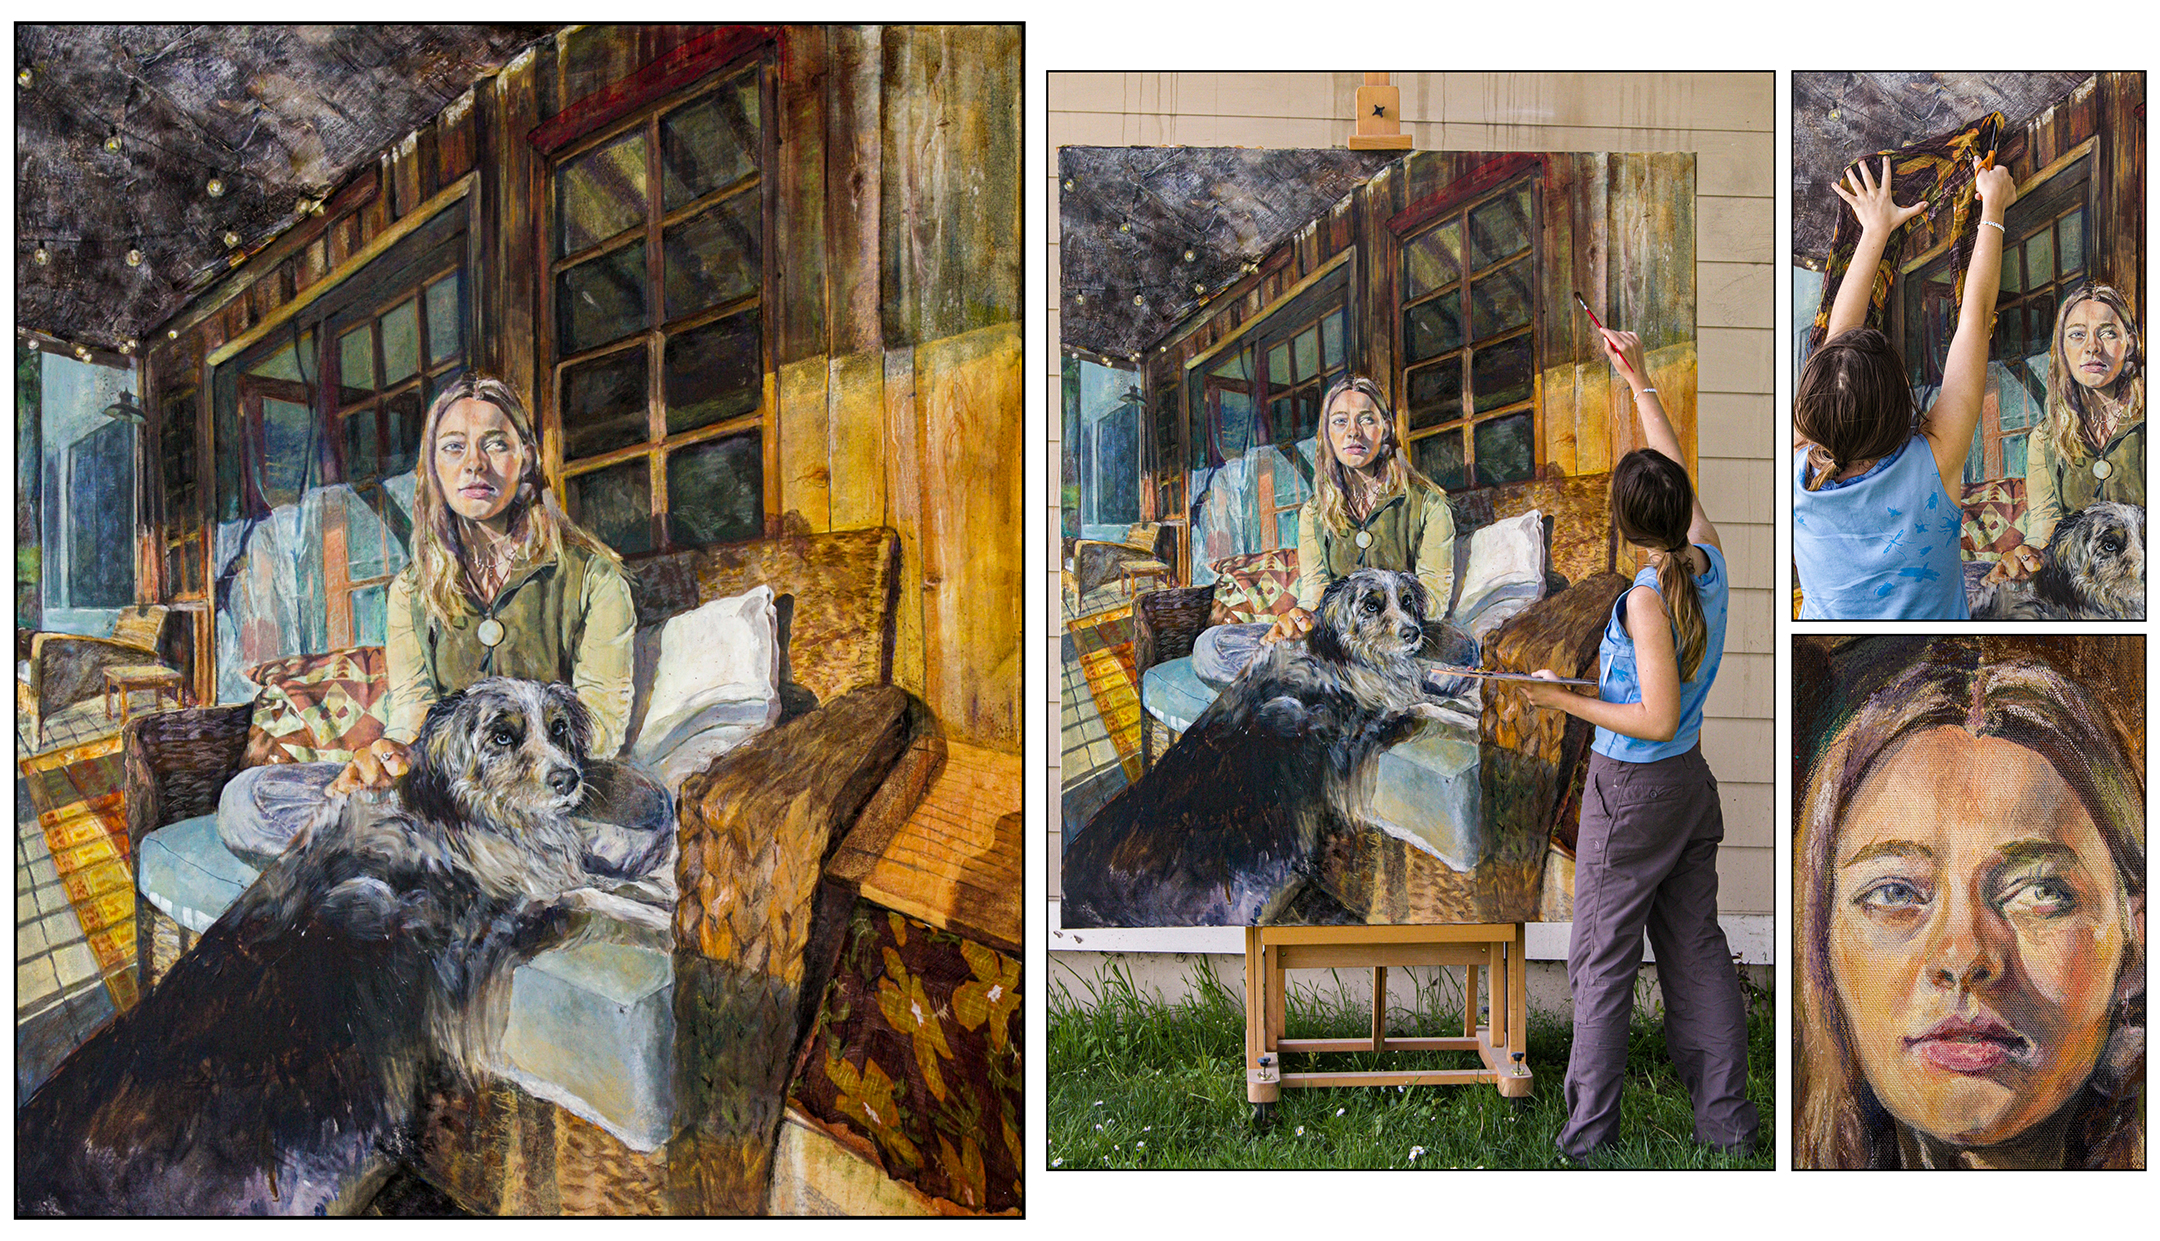 Painting of a young woman sitting on a porch with a dog on her lap, on the left, and three process images of the painting on the right